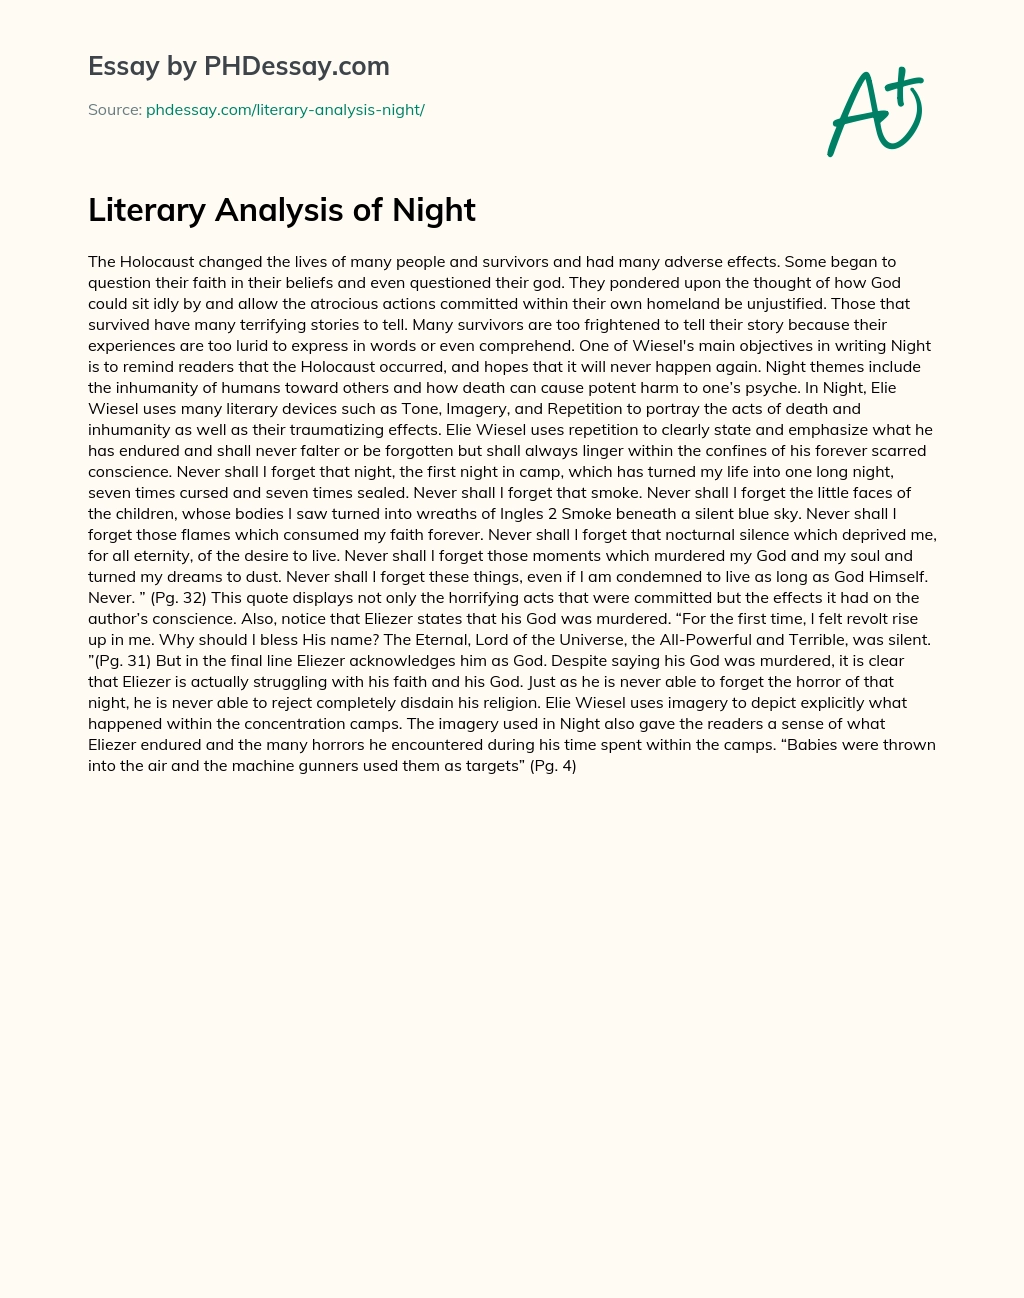 literary criticism of night by elie wiesel